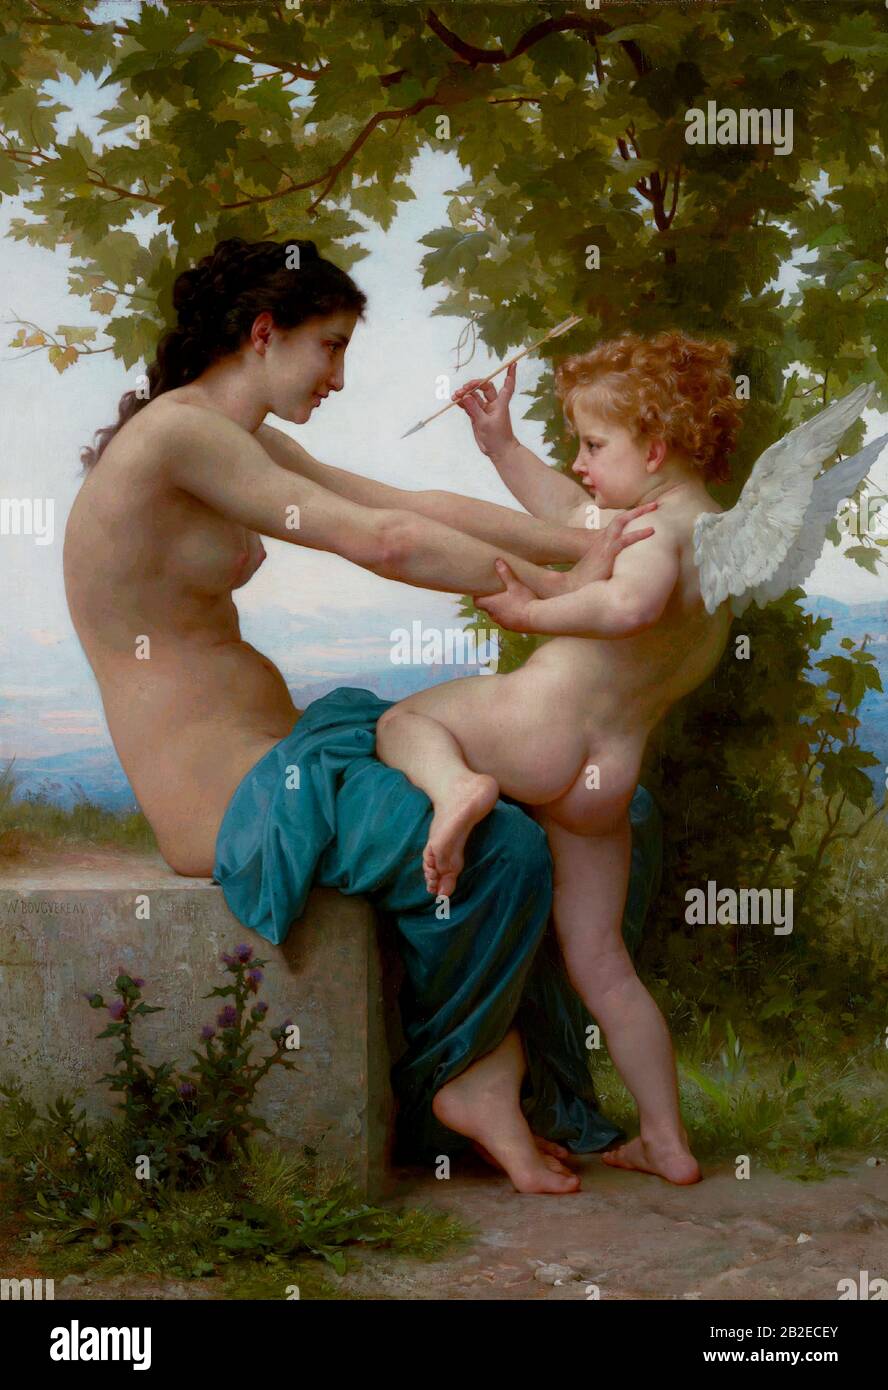 A Young Girl Defending Herself Against Eros (1880) French Academic painting by William-Adolphe Bouguereau - Very high resolution and quality image Stock Photo